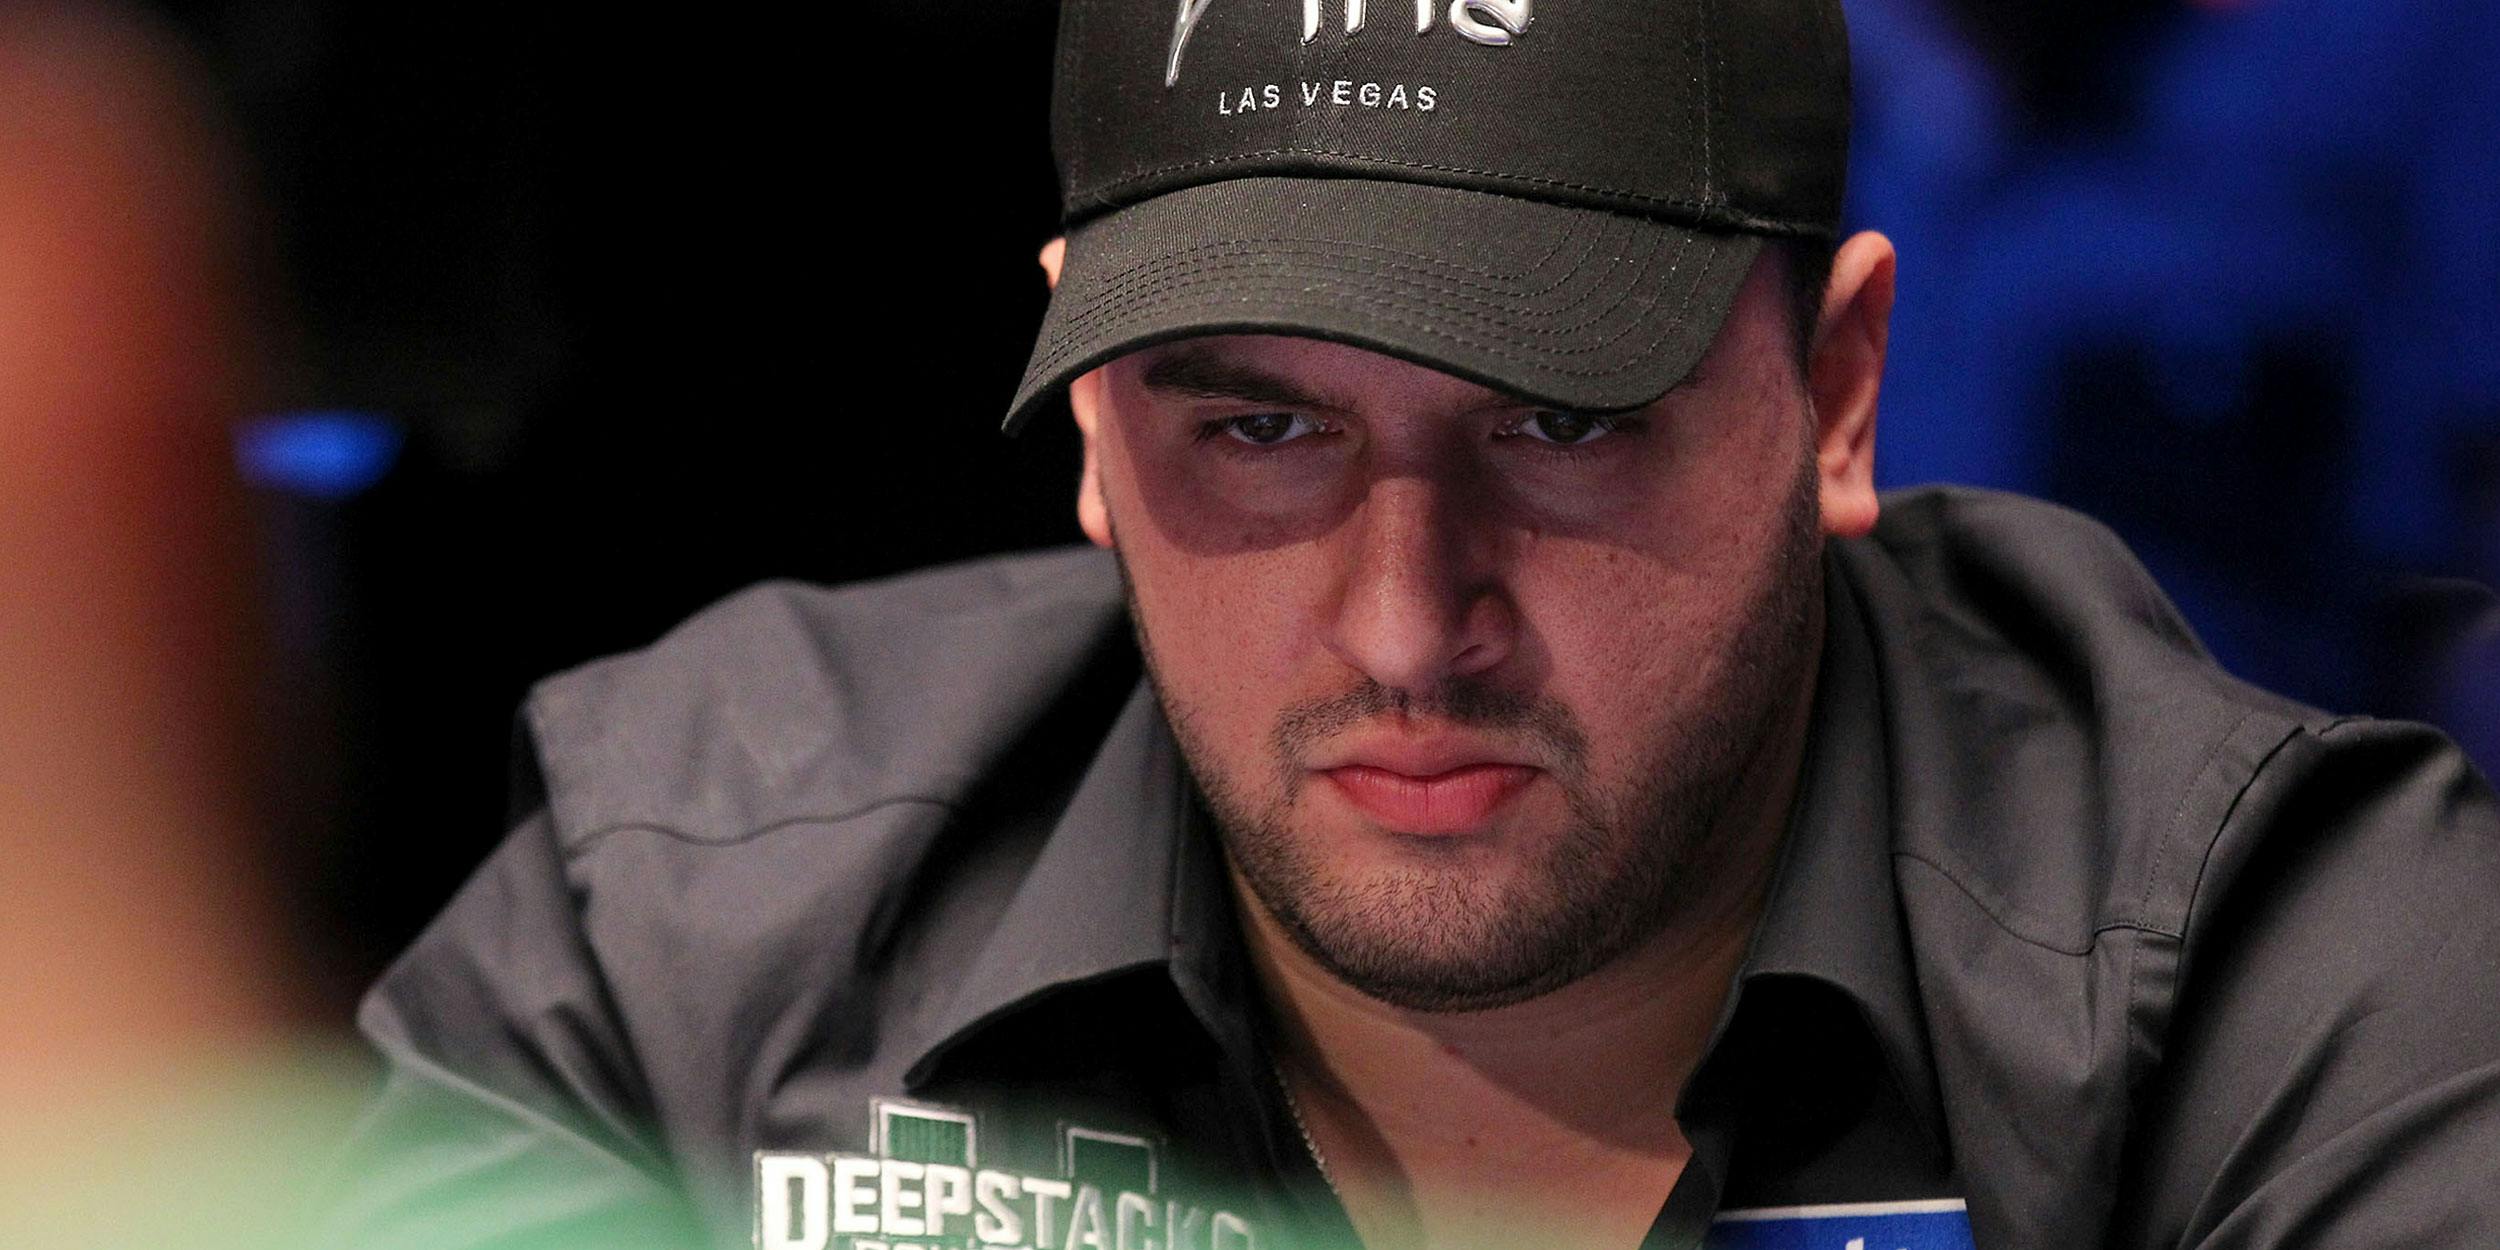 LAS VEGAS, NV - DECEMBER 18: Michael Mizrachi competes at the third Main Event on the final day of the Epic Poker League Inaugural Season at the Palms Casino Resort on December 18, 2011 in Las Vegas, Nevada. The World Series of Poker (WSOP) recently pulled his cannabis endorsement mid-tournament.